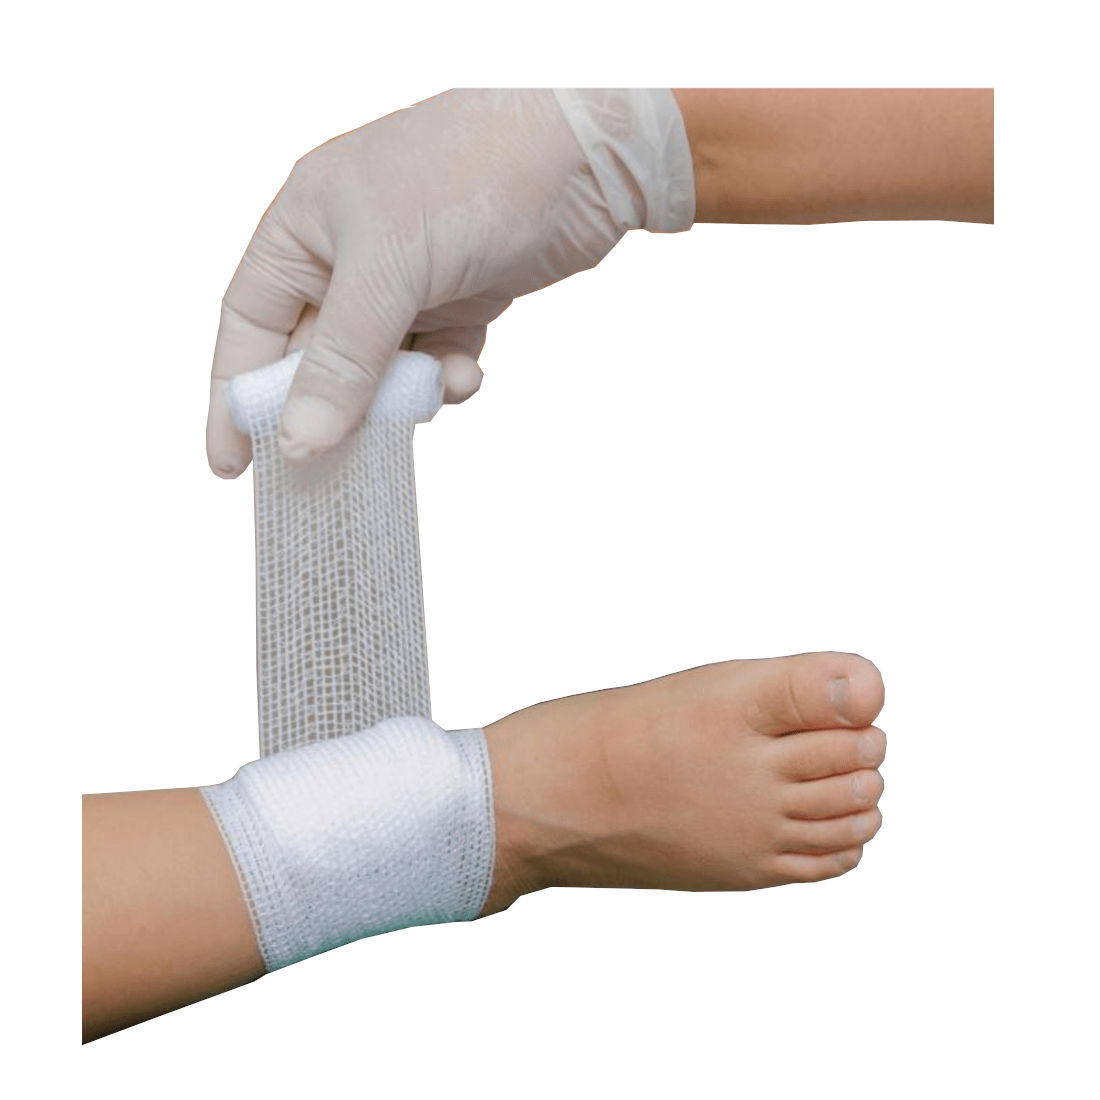 Conforming stretch bandages, relaxed length, individually wrapped, 7.6 cm x 1.8 m (3 in. x 2 yds)